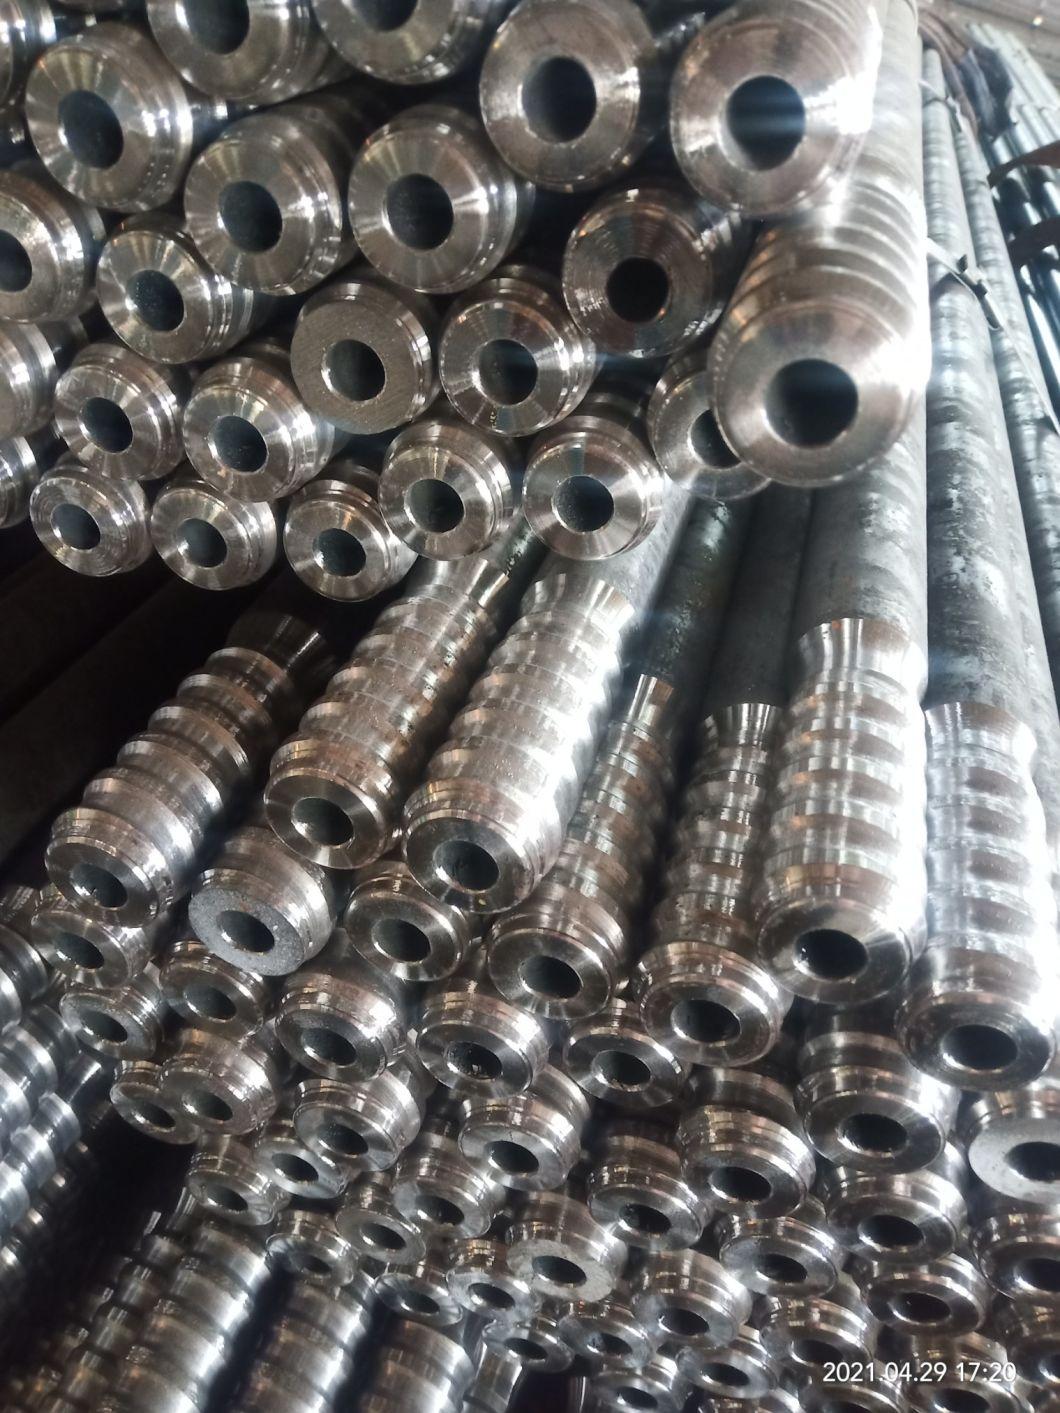 32mm Blast Furnace Drill Rod Manufacturer Independently Produces and Supplies Large Quantities